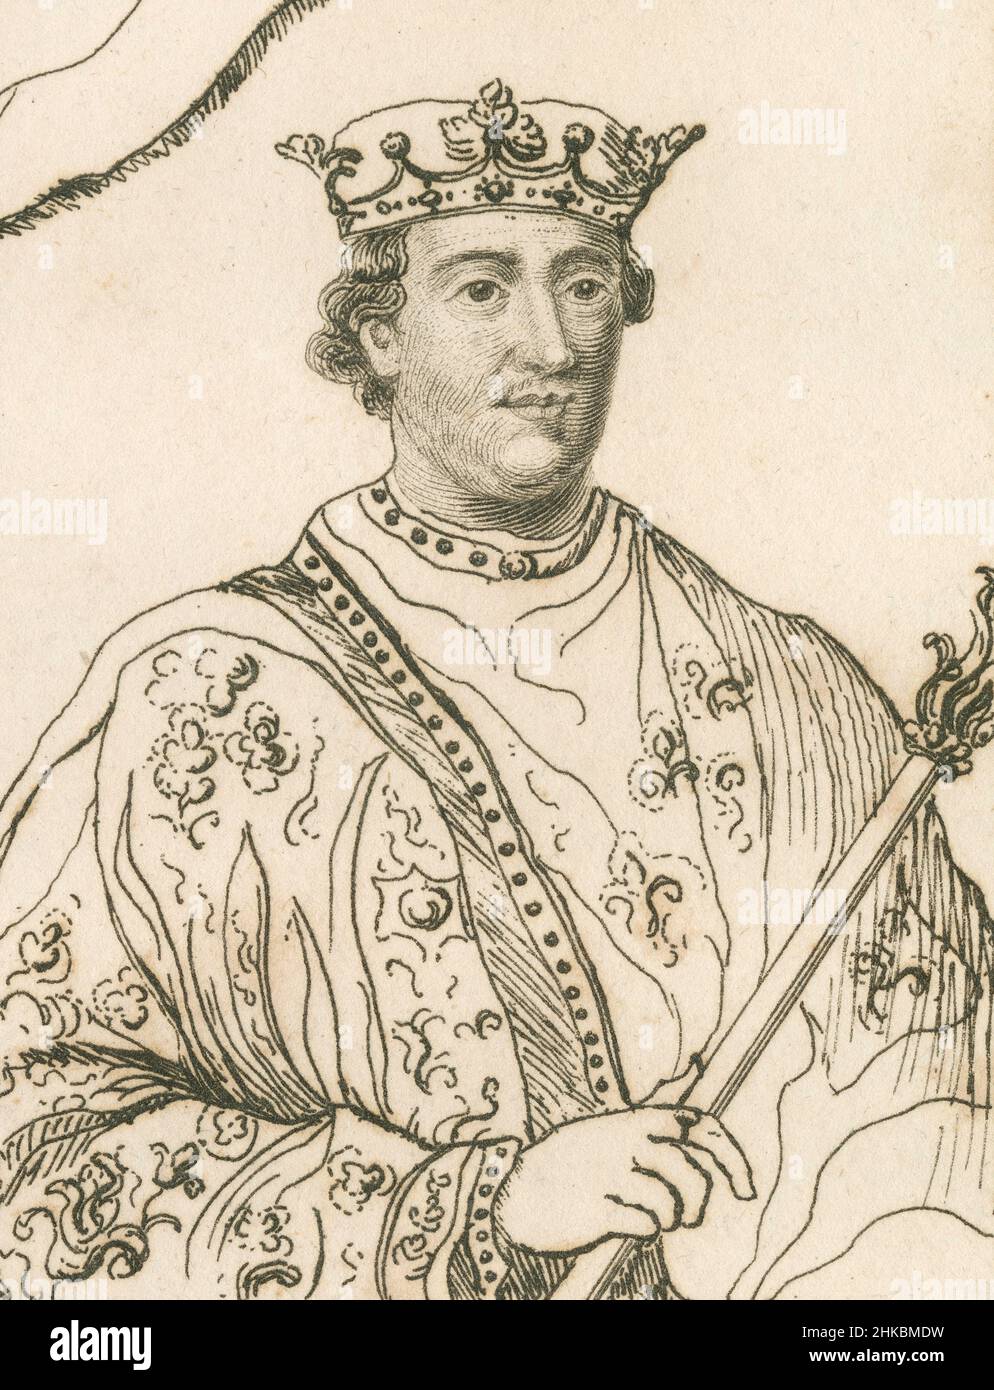 Antique circa 1812 etching of King Henry II of England. Henry II (1133-1189) was King of England from 1154 until his death in 1189. SOURCE: ORIGINAL ENGRAVING Stock Photo